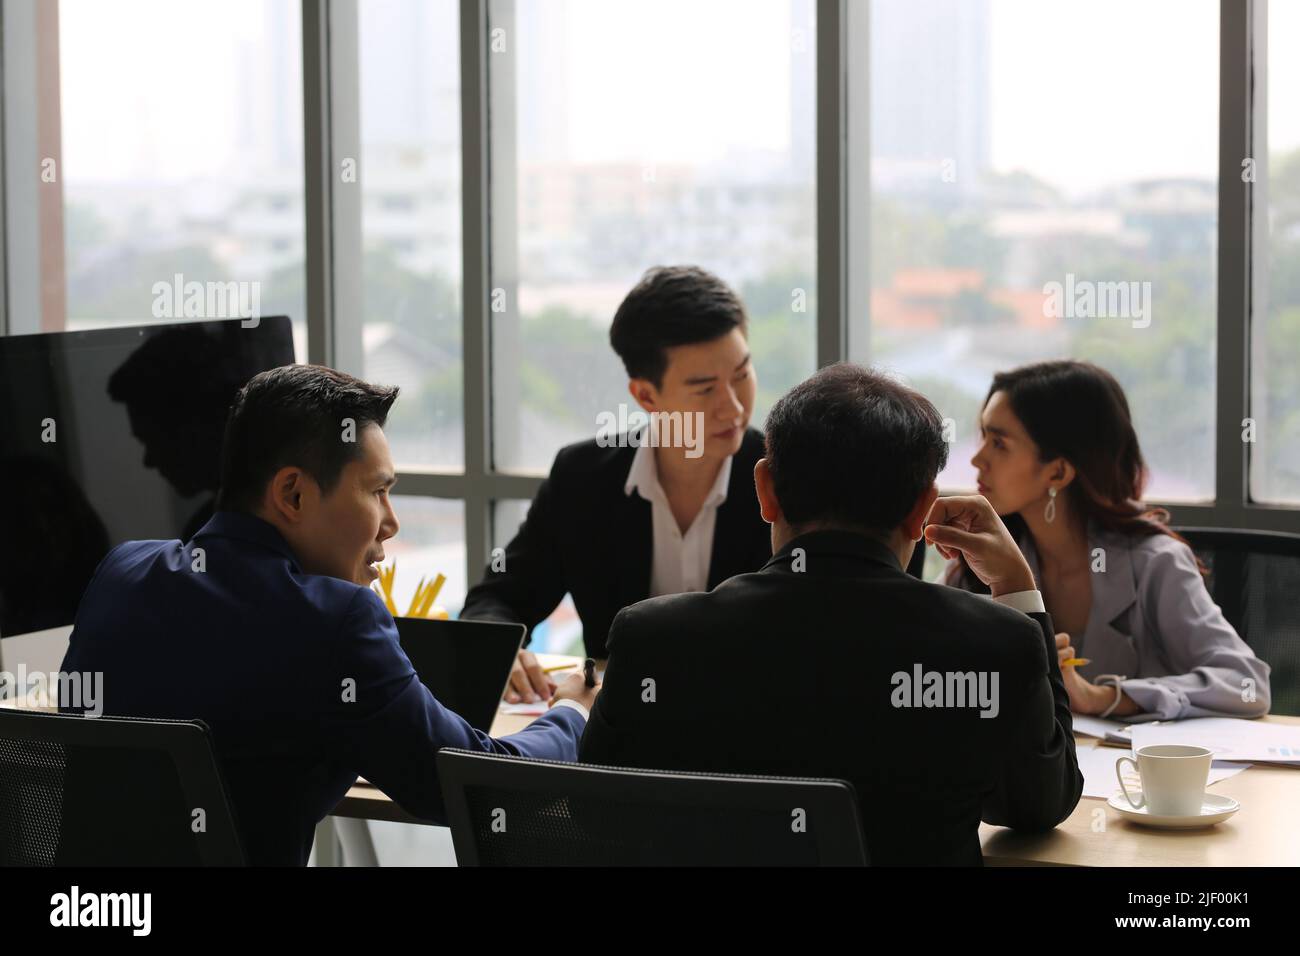 Businessman Giving Speech On Business Meeting With Colleagues, Discussing Work Ideas And Projects, Making Presentation Standing In Modern Office. Team Stock Photo